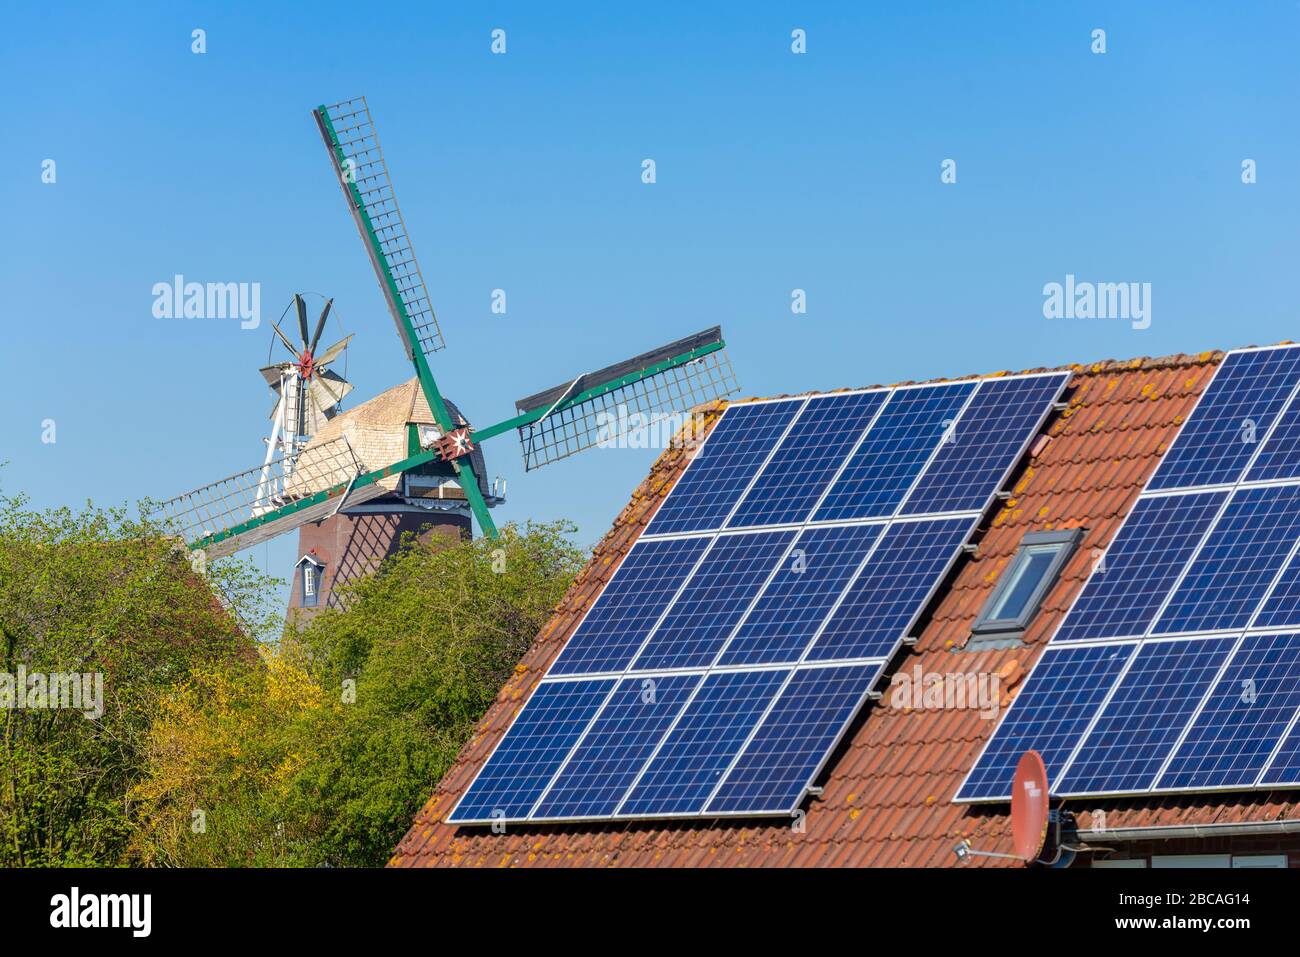 Germany, Lower Saxony, East Frisia, Emden, modern and old technology. Stock Photo